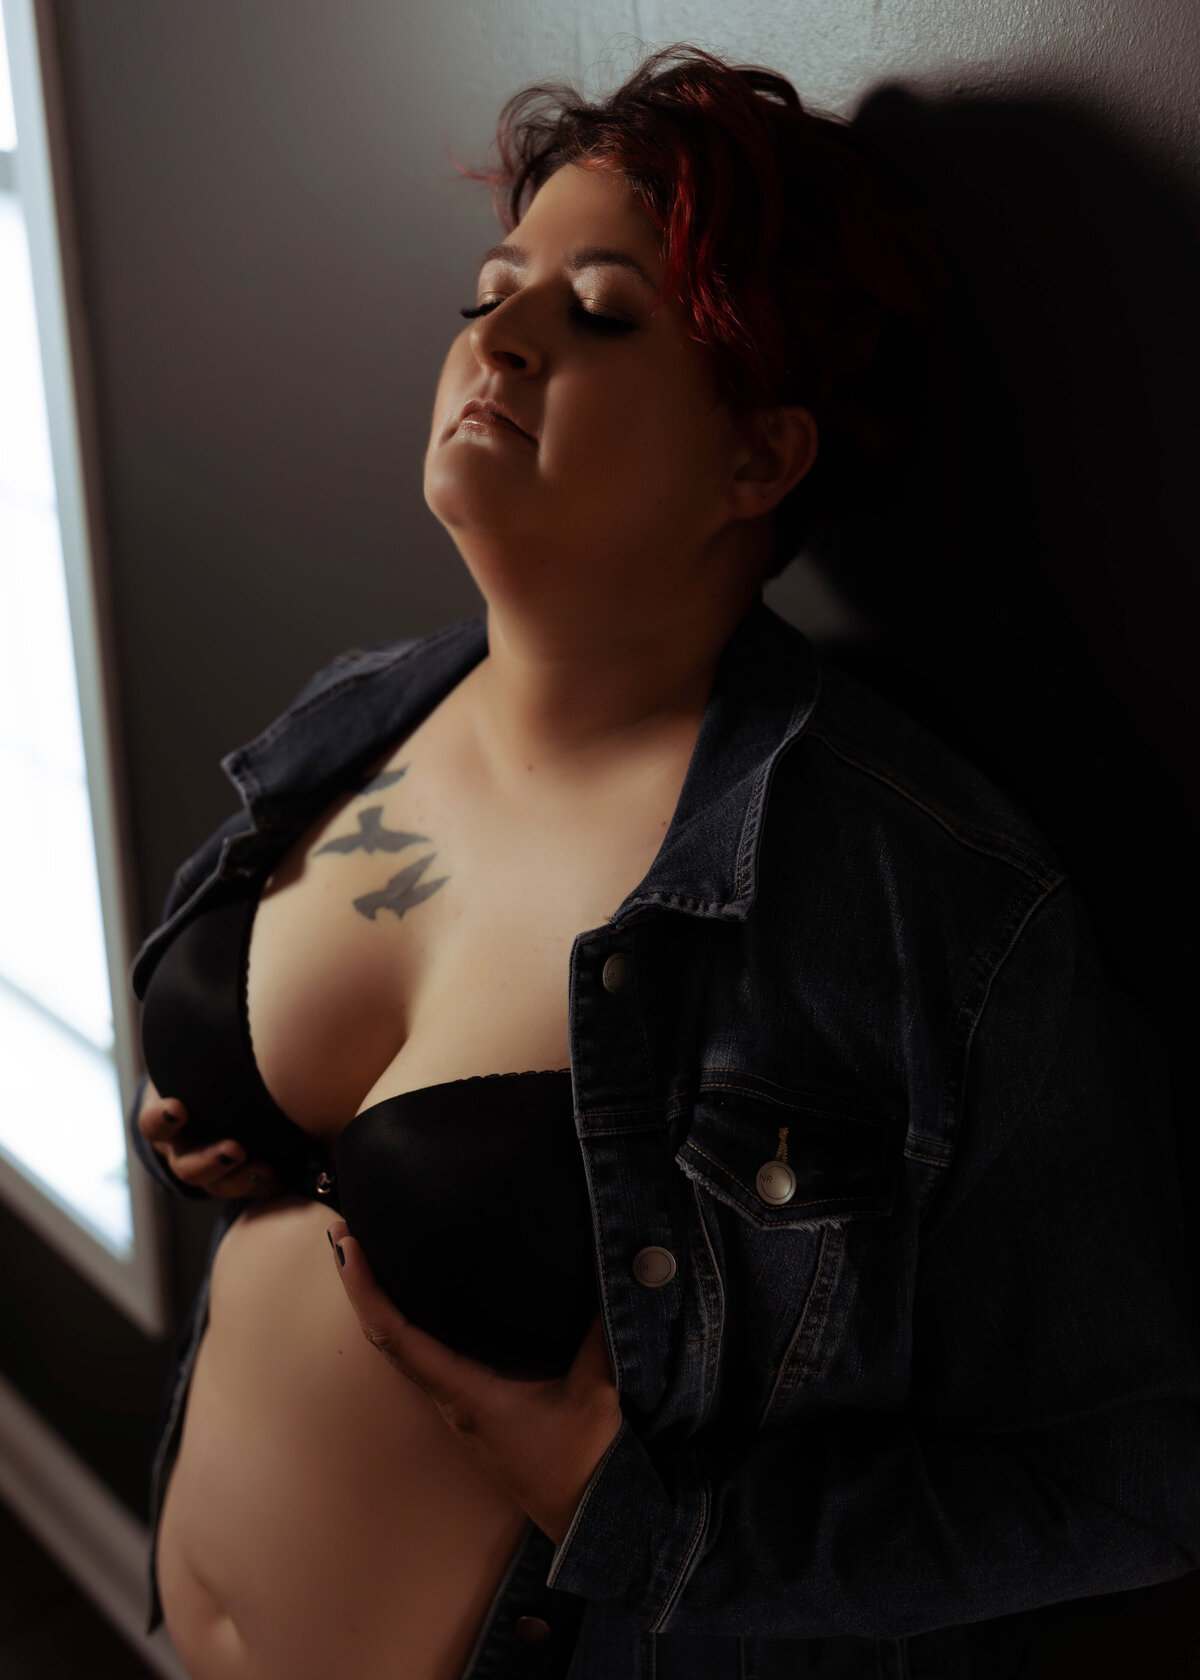 close up boudoir photo of woman with short hair in leather jacket and bra elkridge